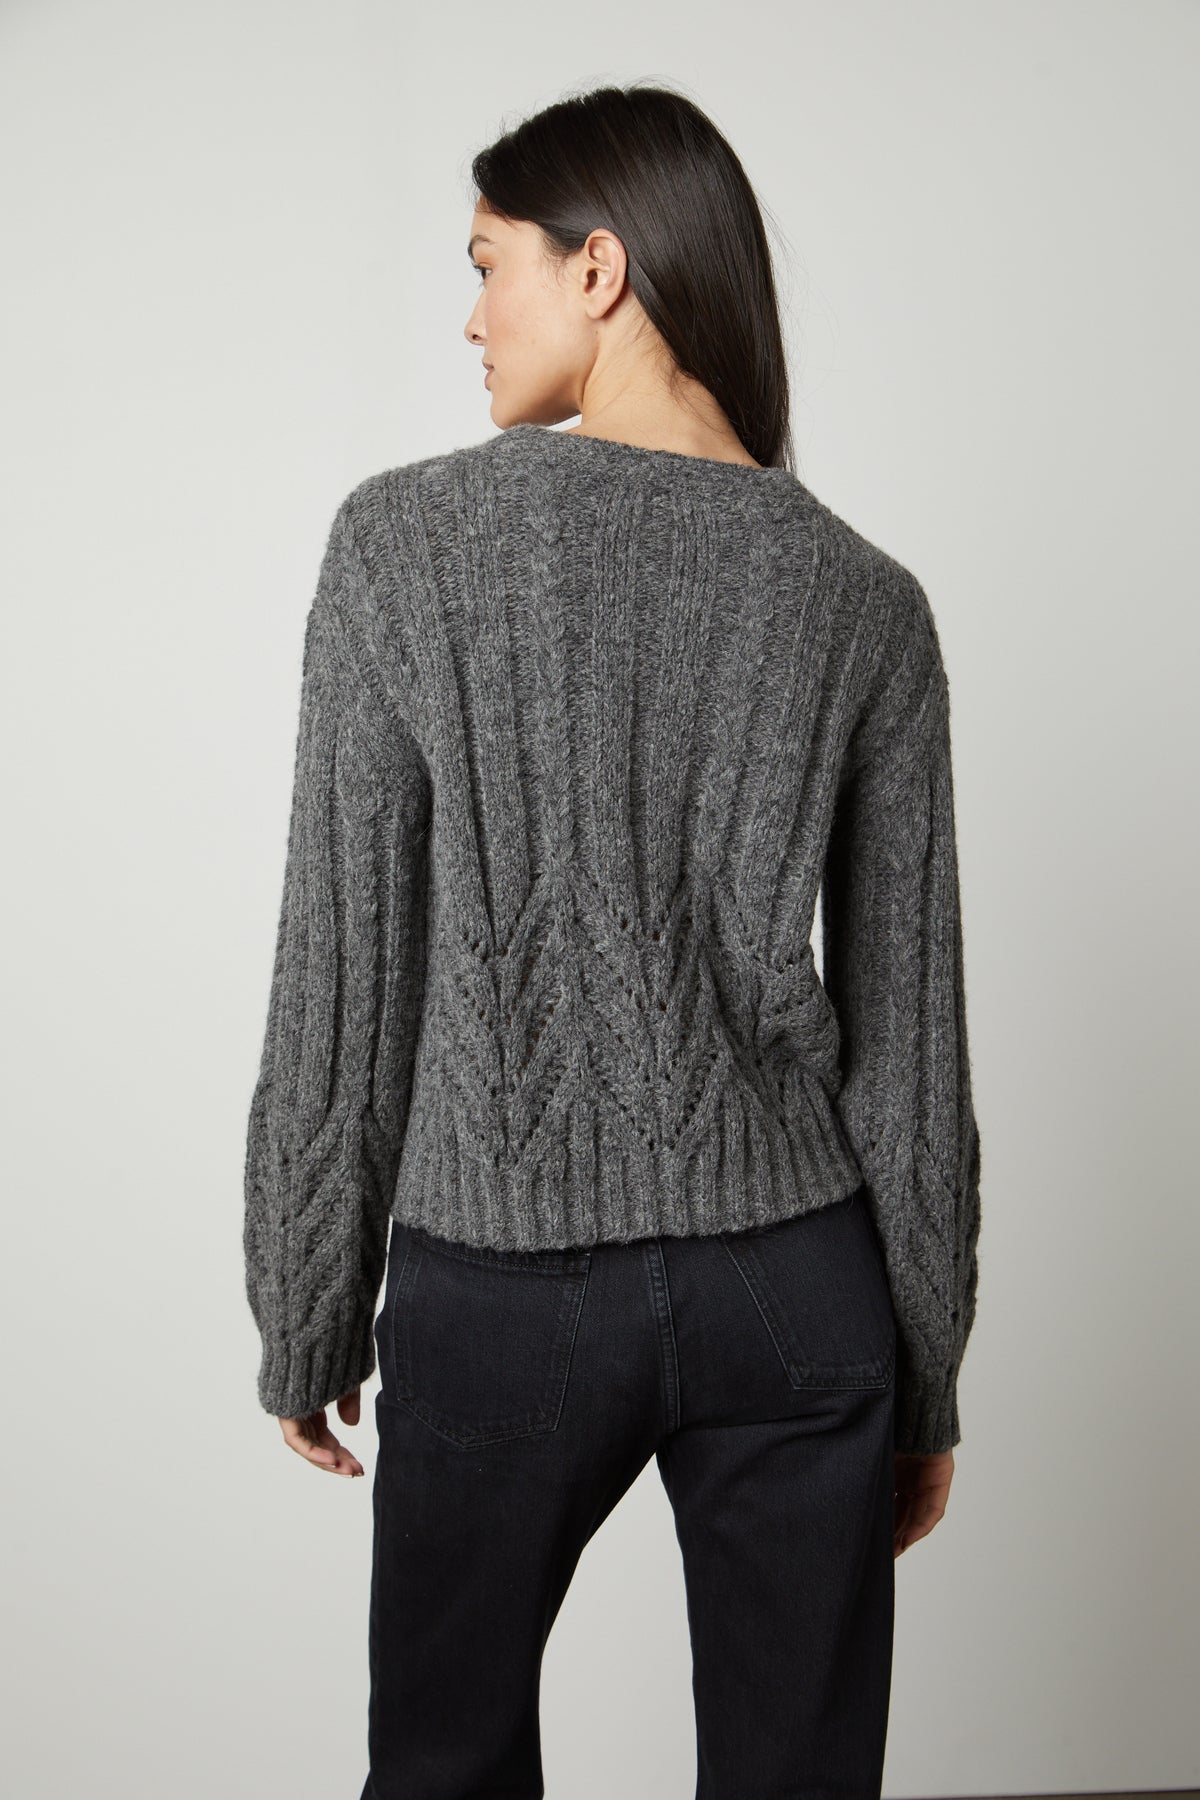 The back view of a woman wearing a Hazel Alpaca Cable Knit Cardigan by Velvet by Graham & Spencer.-26897822187713